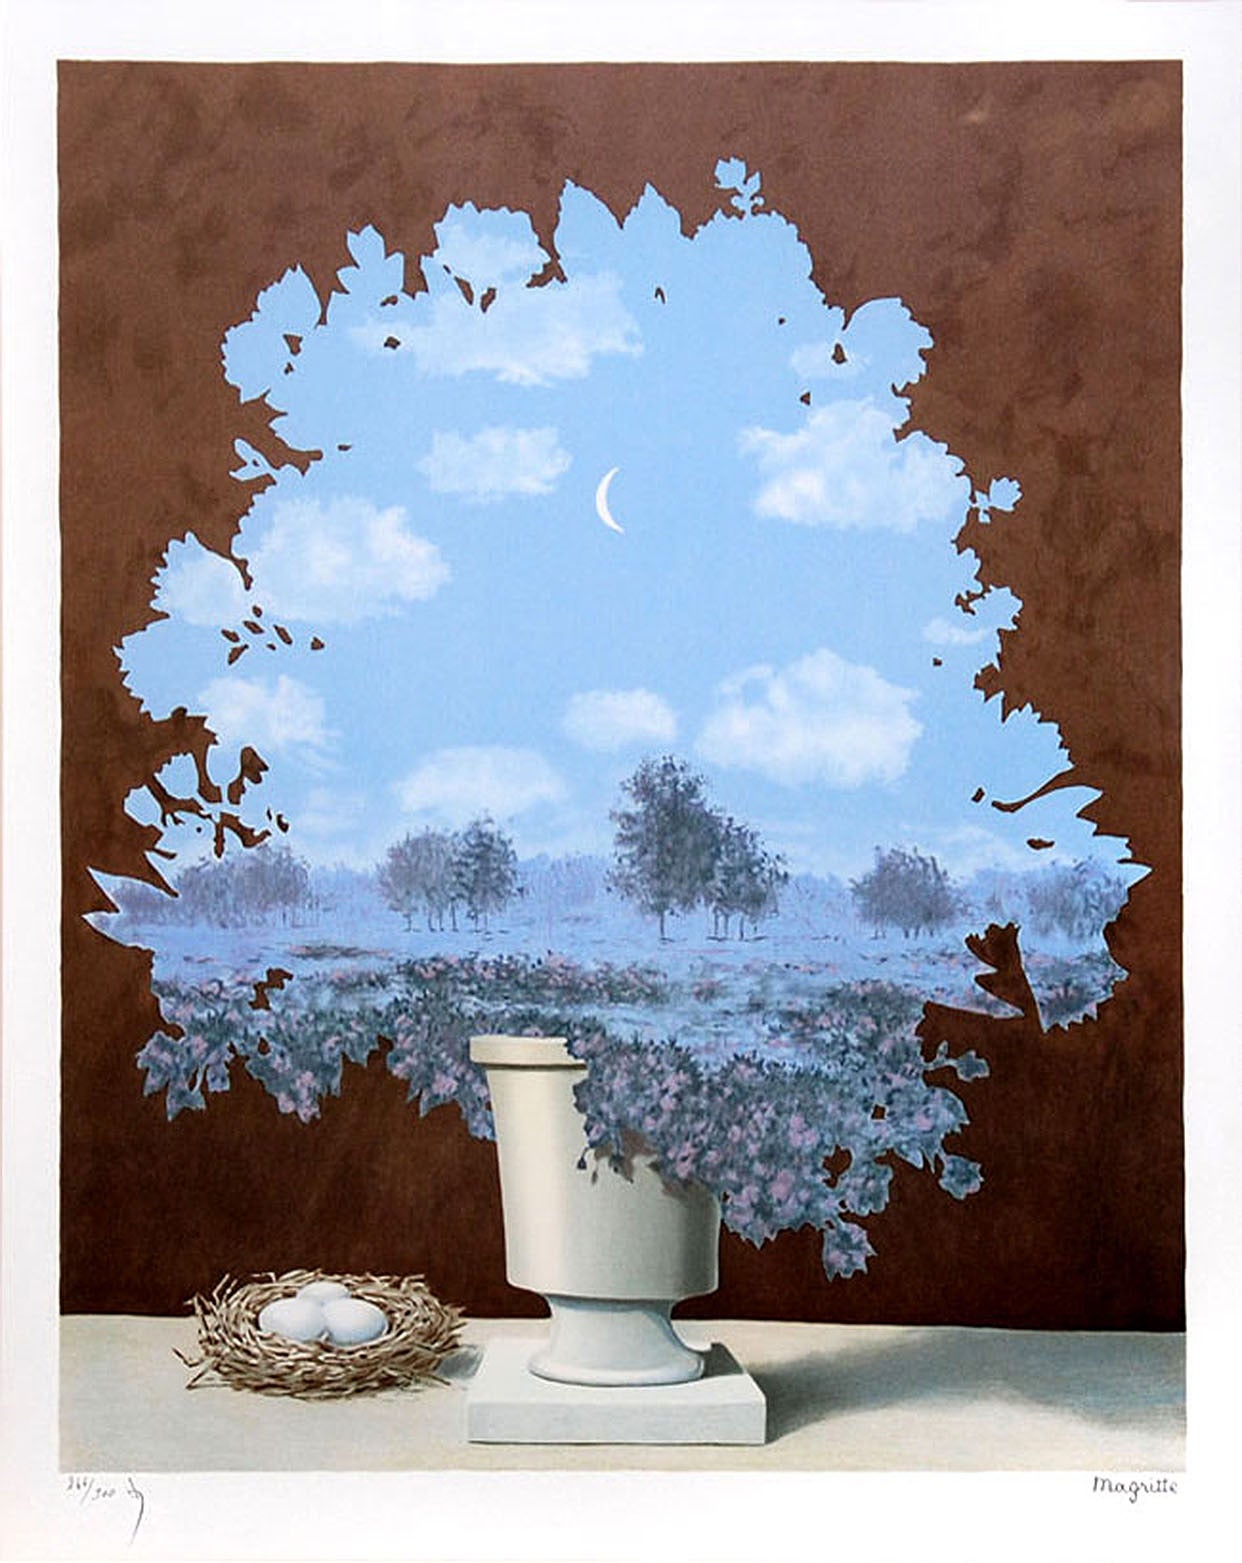 Le pays des miracles (The Country of Marvels) - Print by René Magritte